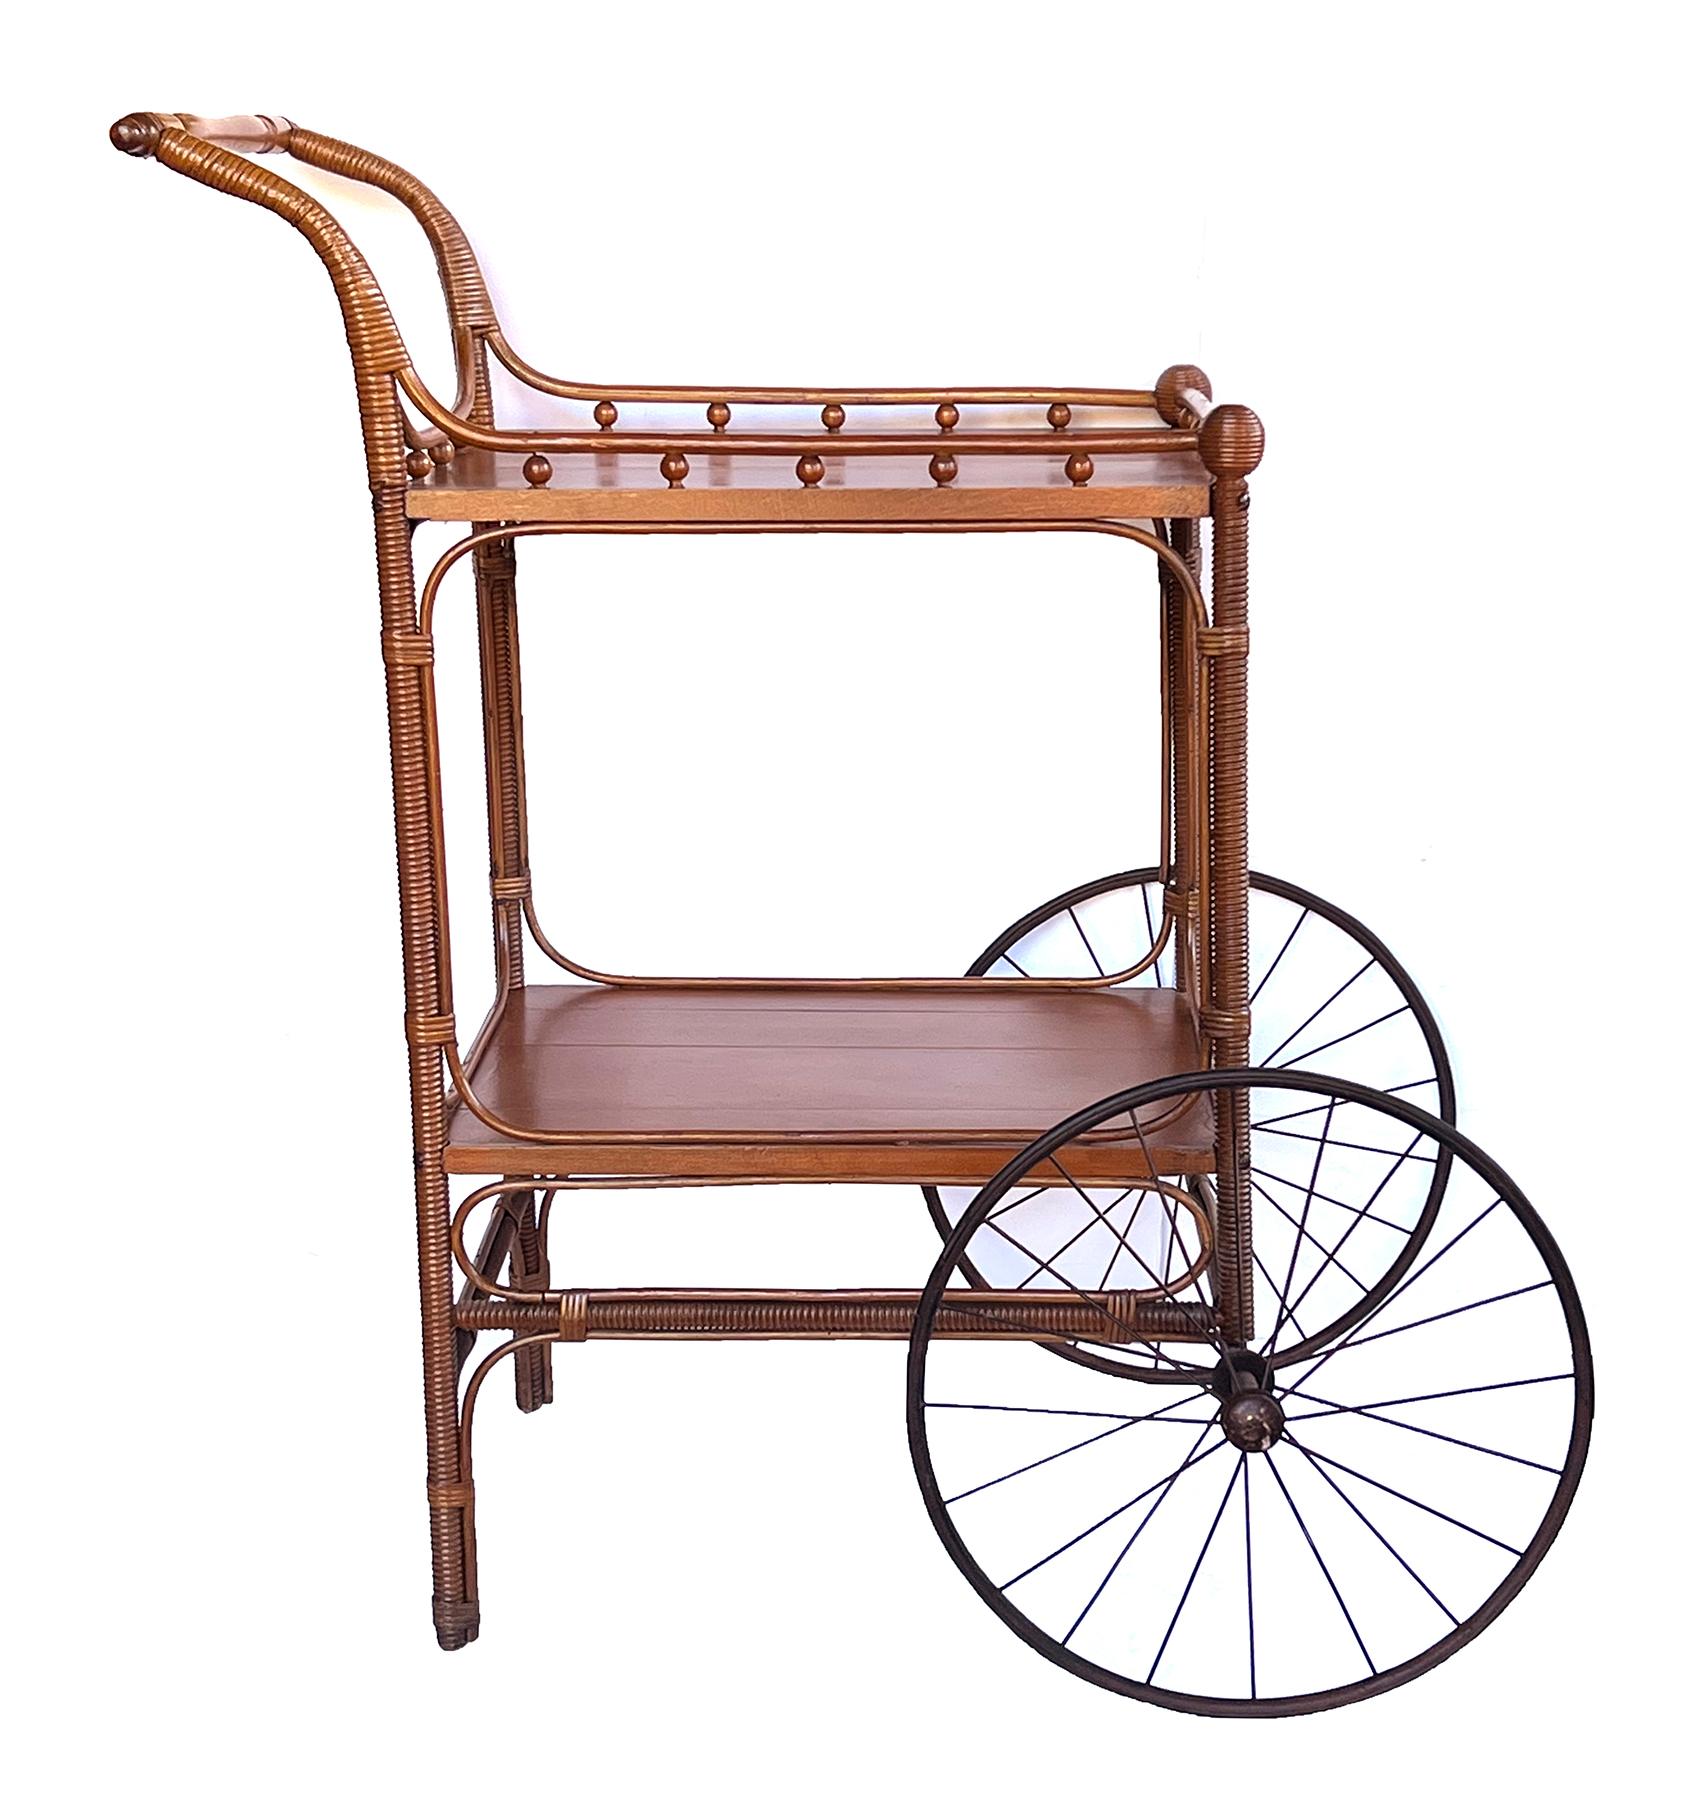 the two-wheeled drinks trolley with turned handle joining a rectangular top within an openwork gallery all raised on wicker-wrapped supports joining a lower shelf; The Heywood Furniture Co. began in 1826 making wicker and rattan furniture. In 1897,